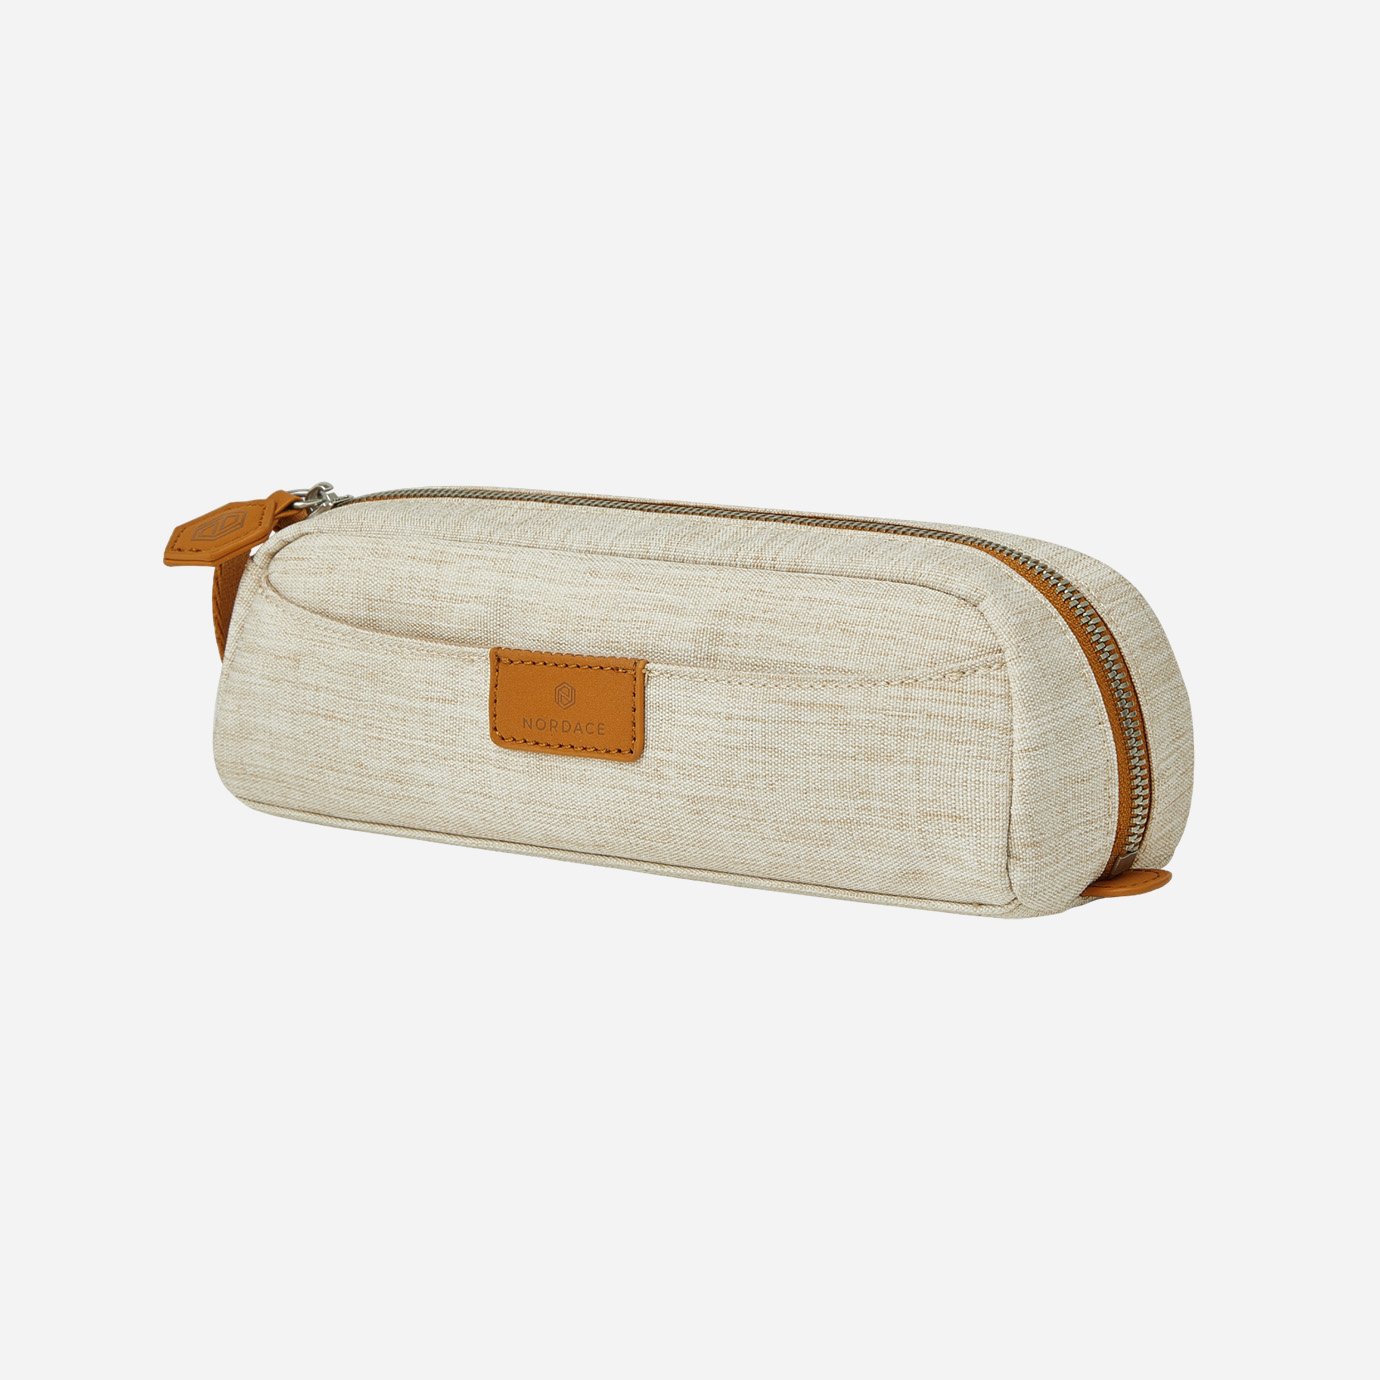 Nordace Siena Pro pencil case is available in two colors - beige  stylish  style for class, work and meeting - Shop nordace Pencil Cases - Pinkoi